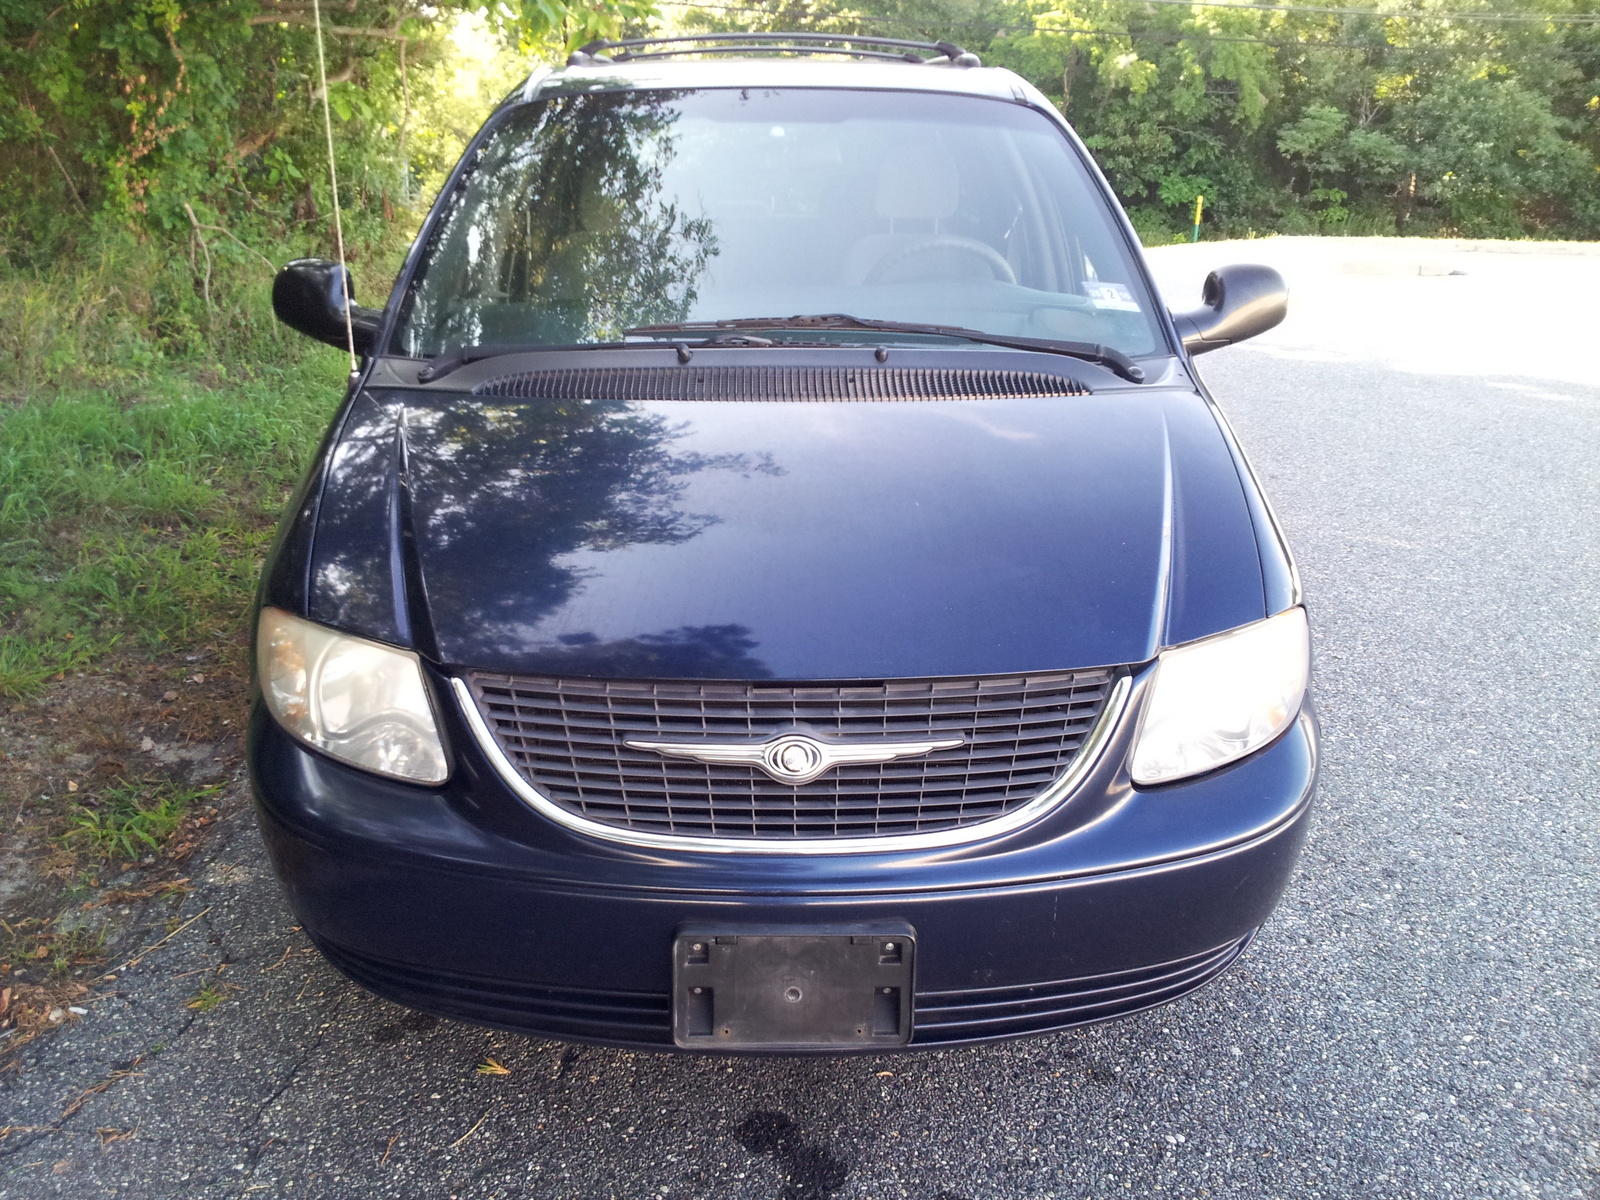 2004 Chrysler town country models #5